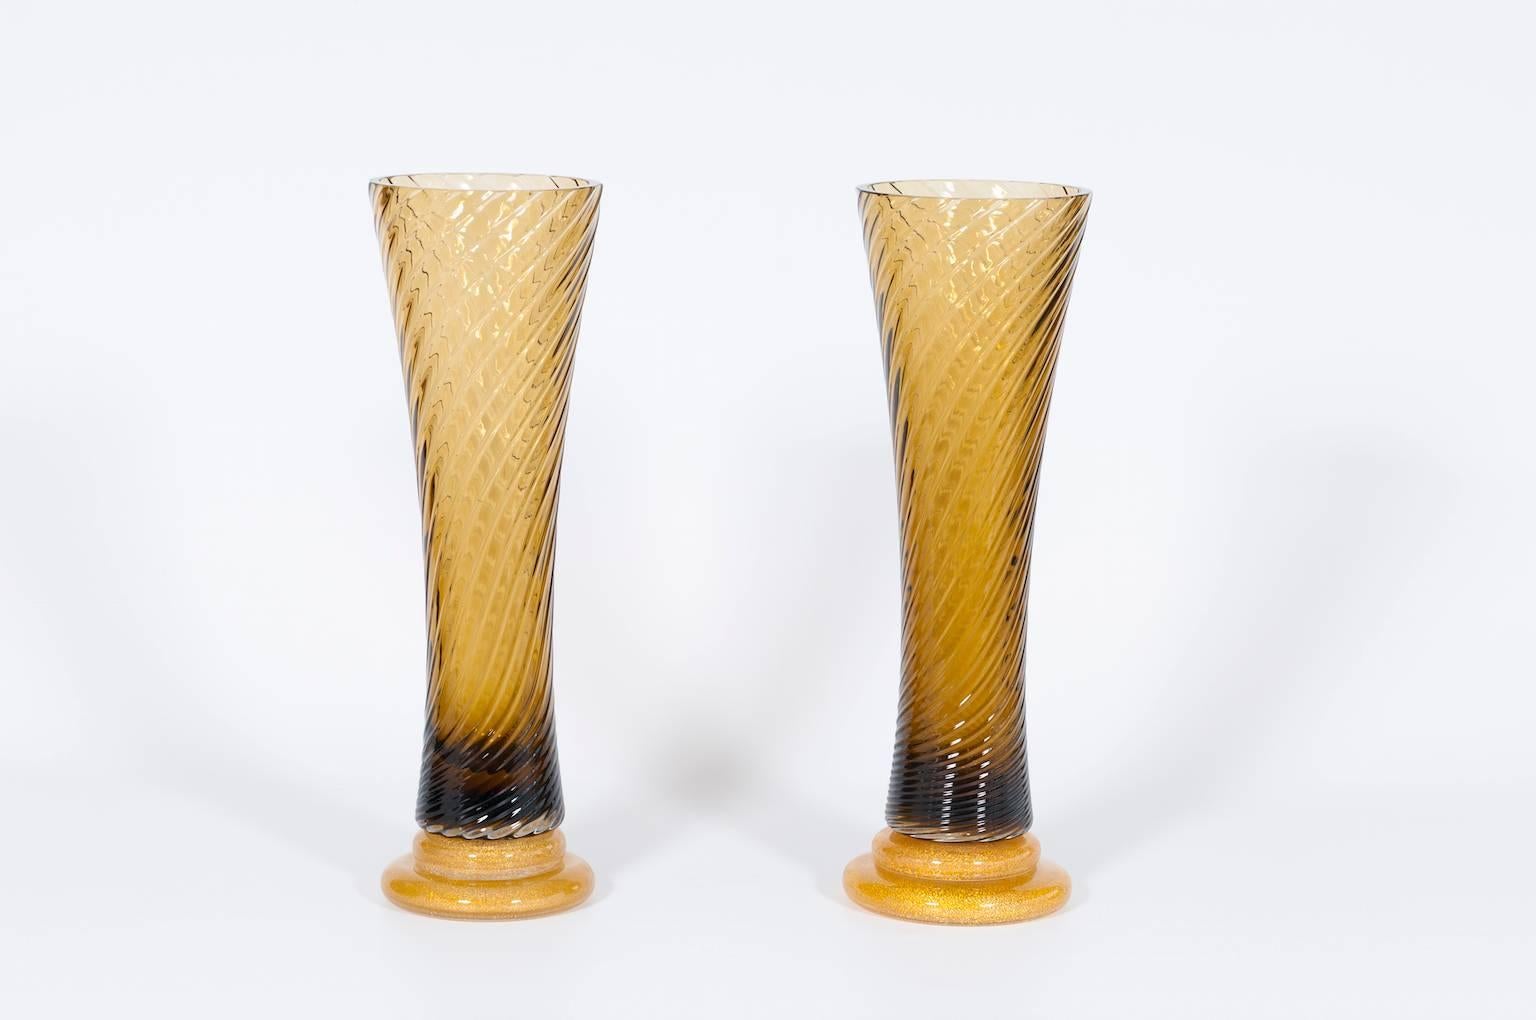 Giant Pair of amber Glasses Vase in blown Murano Glass 1980s.
Pair of elegant Italian Murano glass vases in amber and gold. Fine and very thin and long amber glasses in a twisted handcrafted blown Murano glass coupled in a gold basement entirely